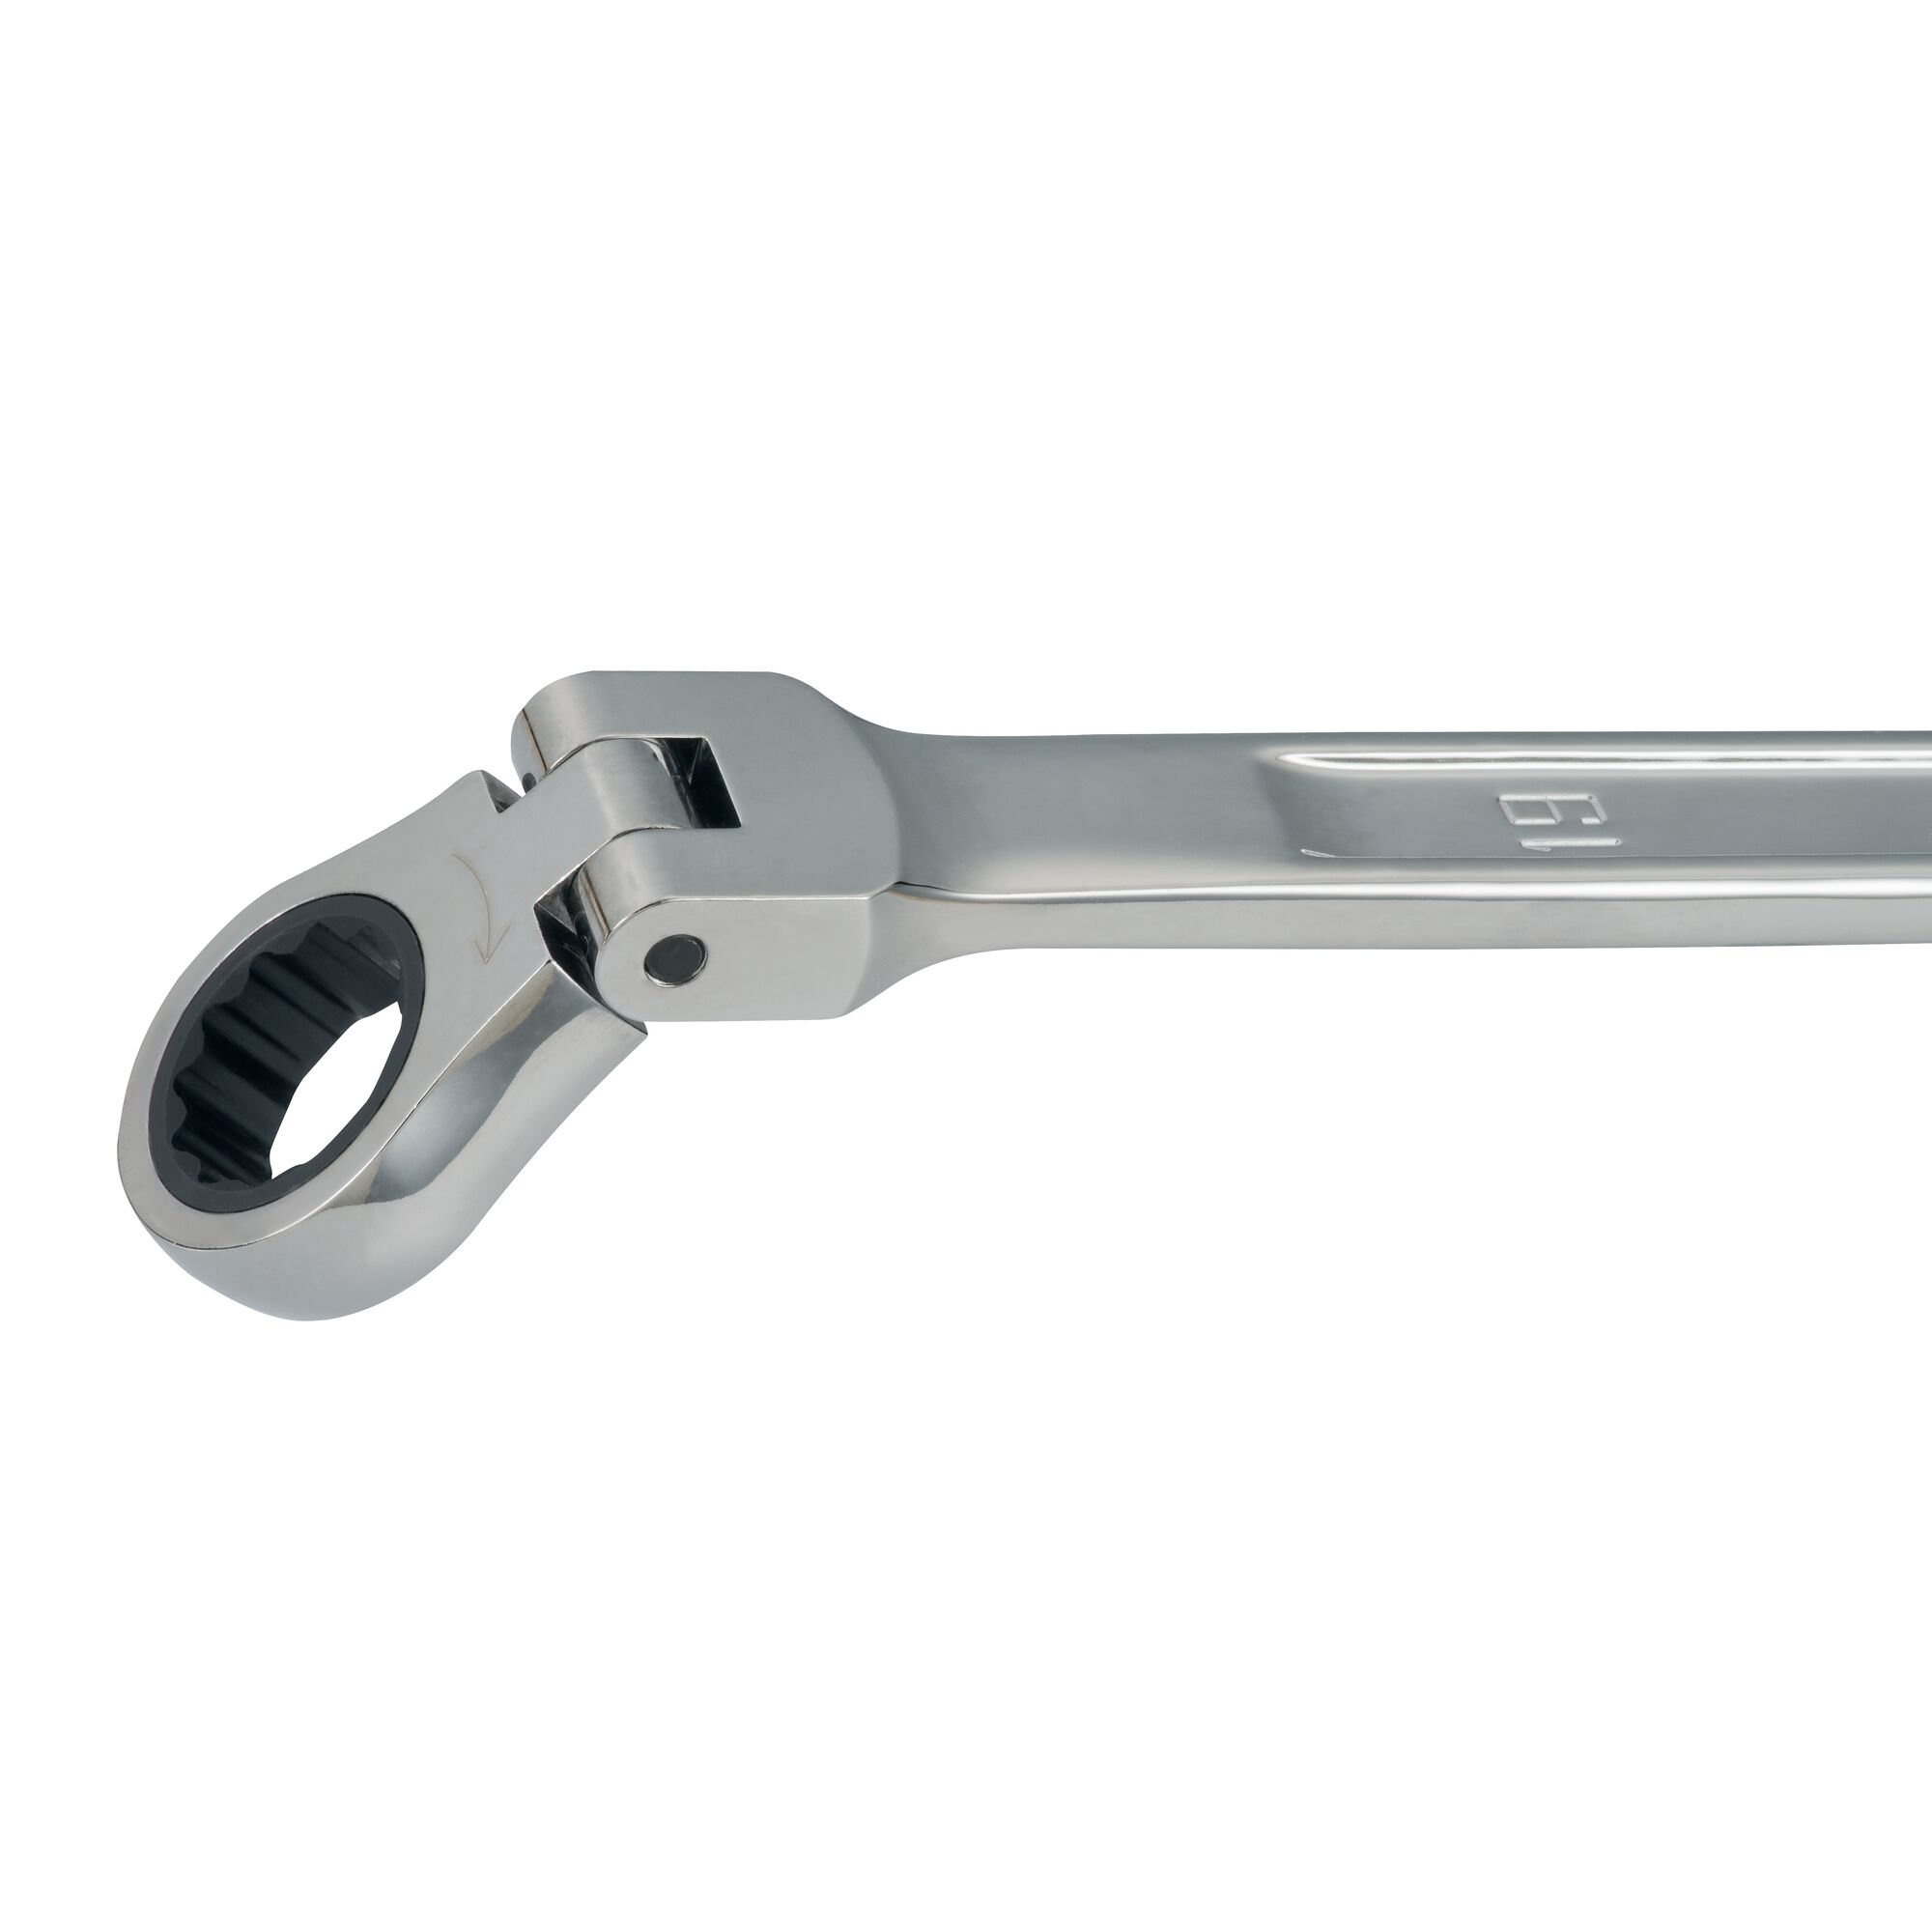 180 degrees articulating head feature in V series XXL metric ratcheting single flex head double box end wrench set (7 piece).